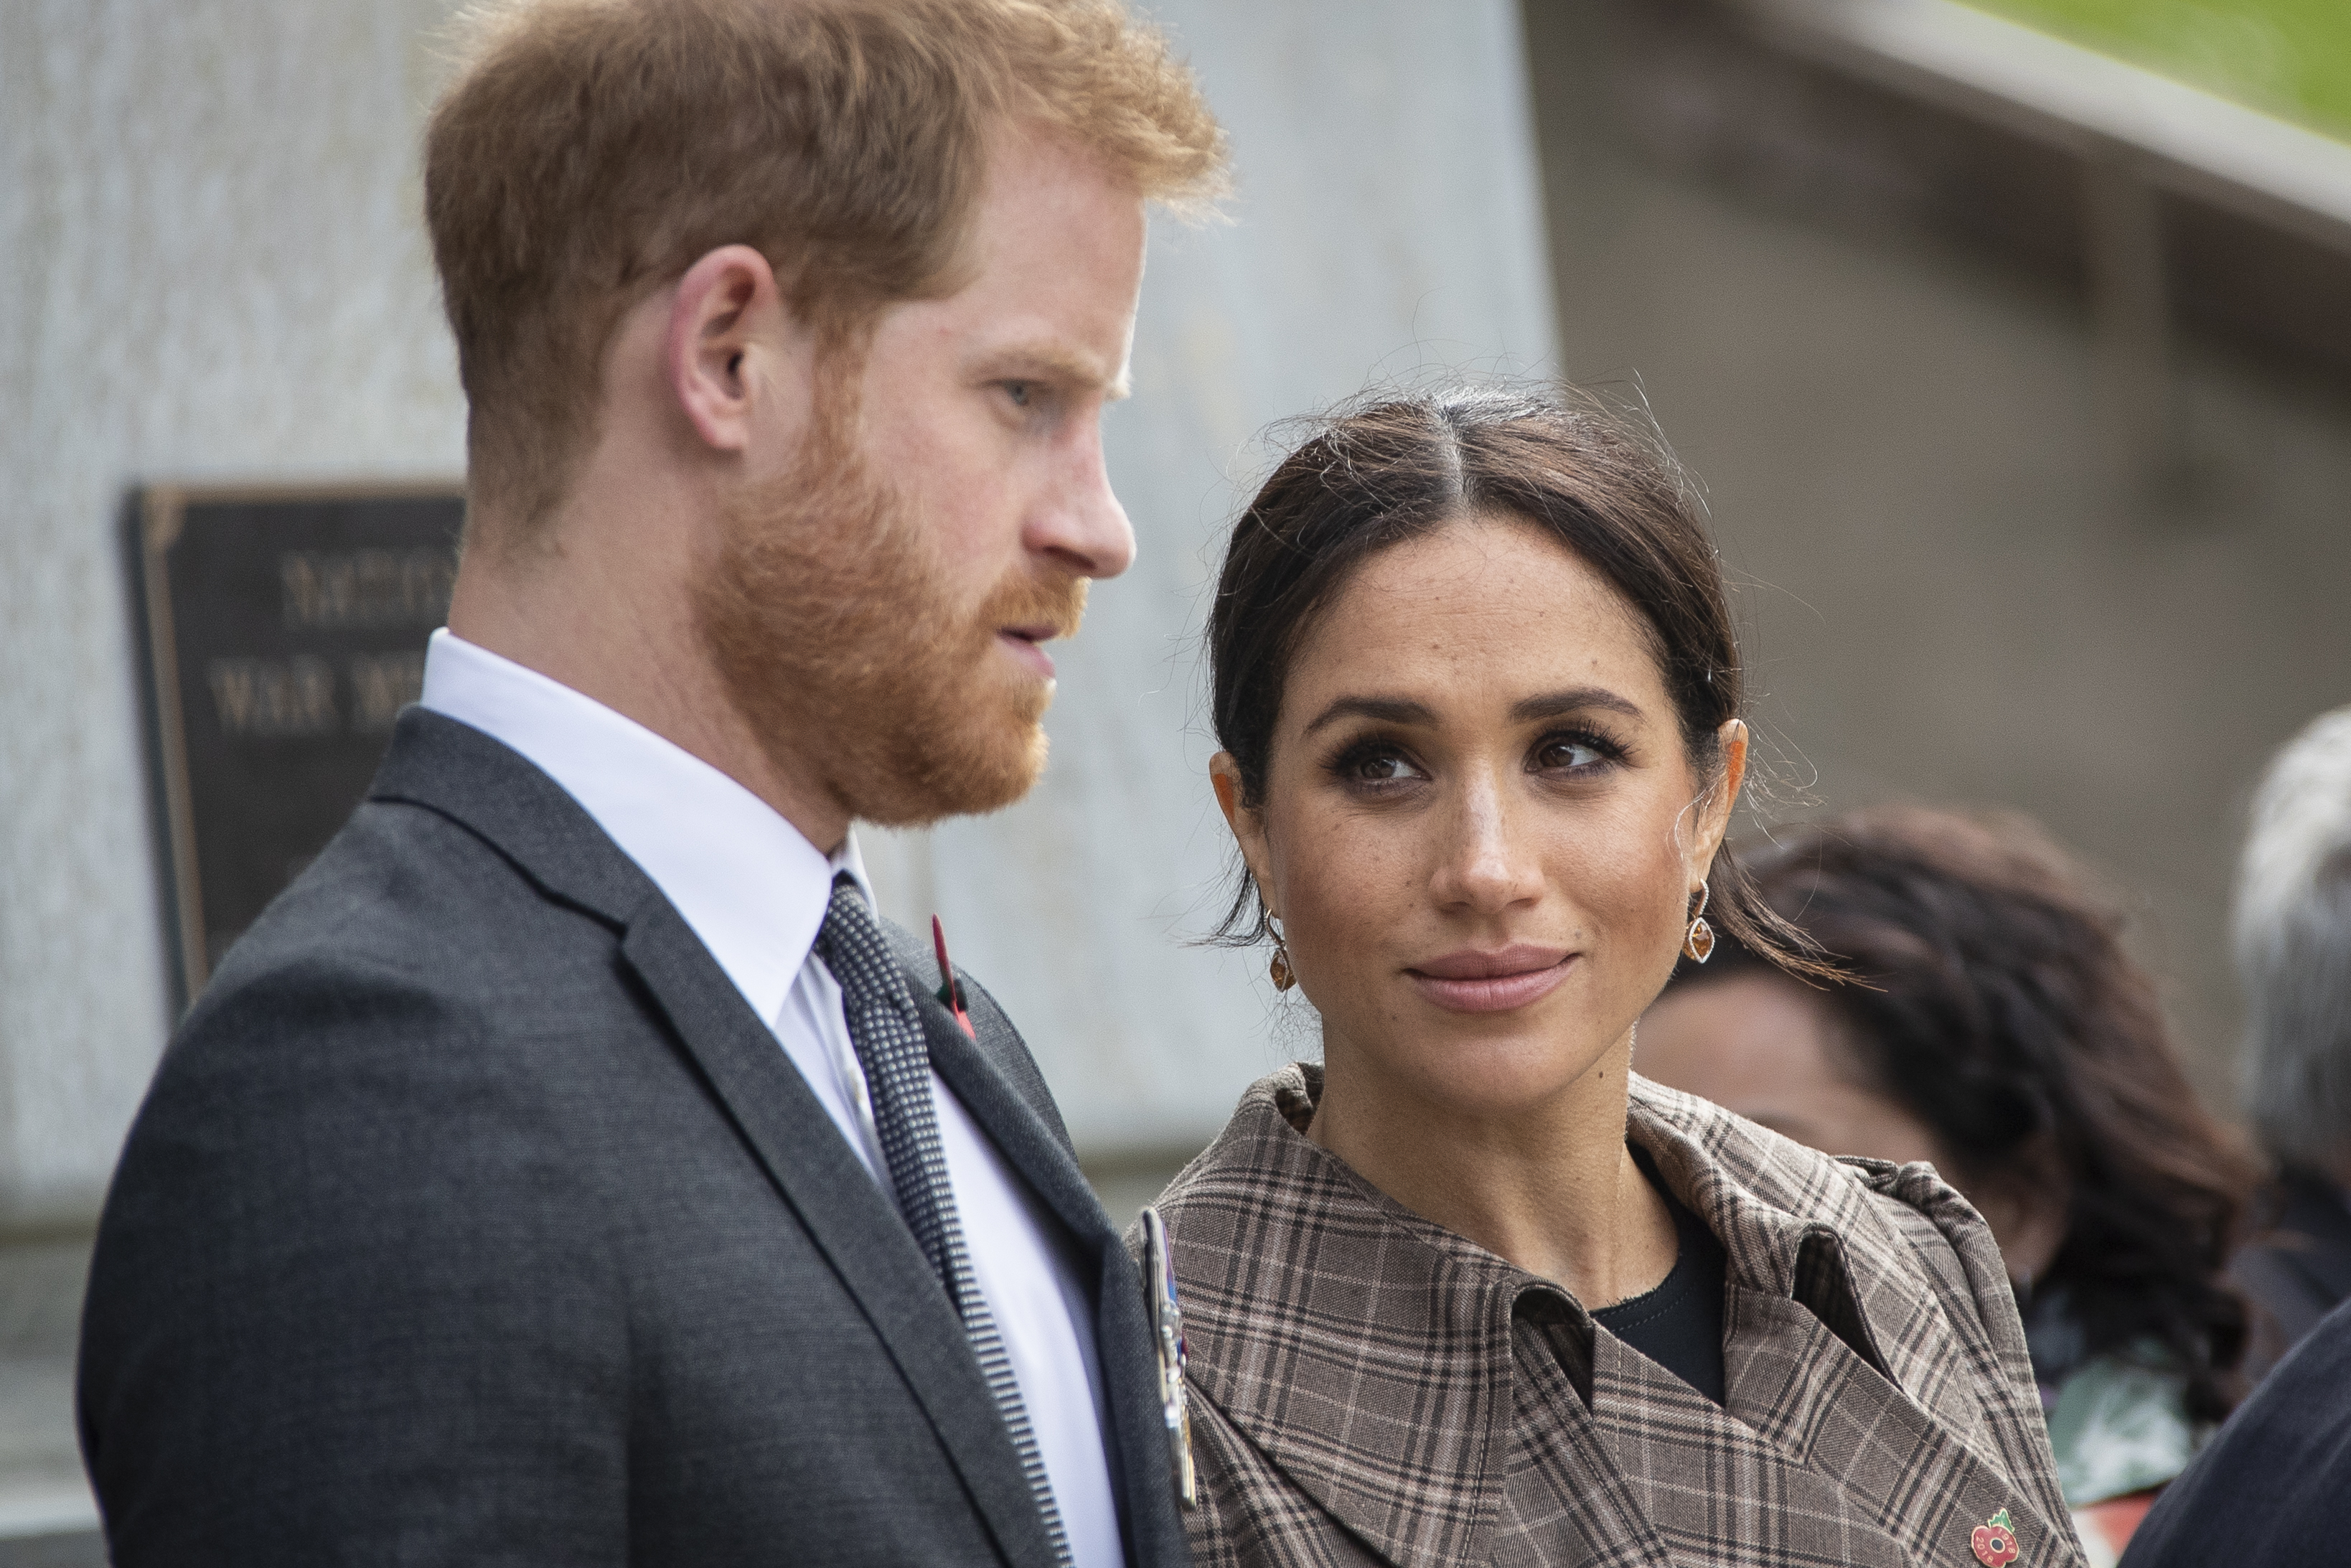 Prince Harry and Meghan Markle visiting New Zealand in 2018 | Source: Getty Images